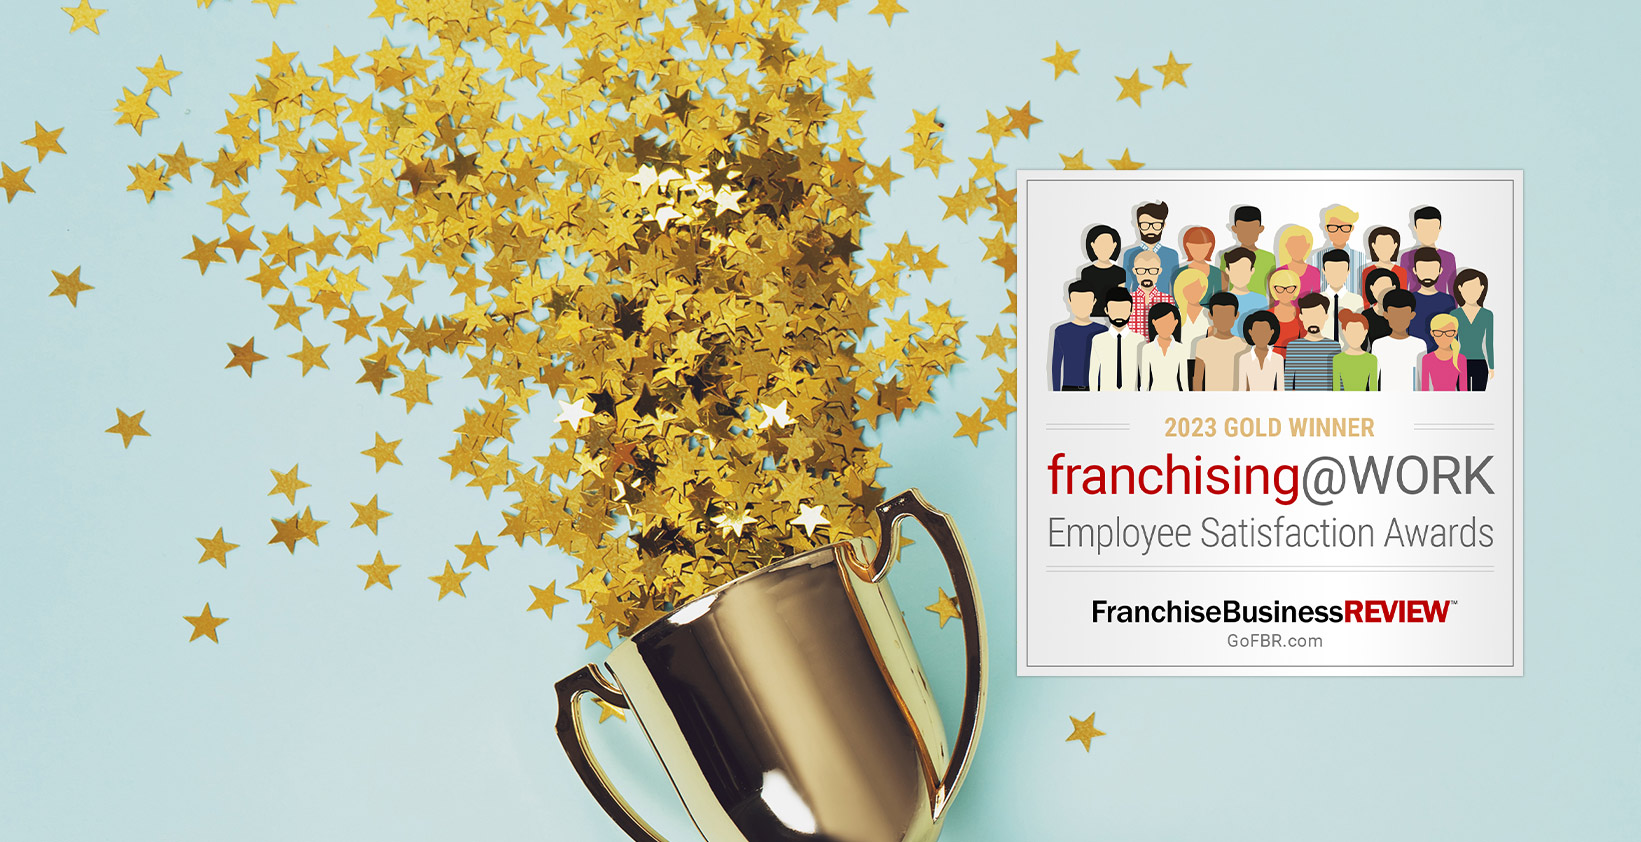 Curious Jane Wins Top Award Among Suppliers In Franchise Business Review’s Franchising@Work Awards